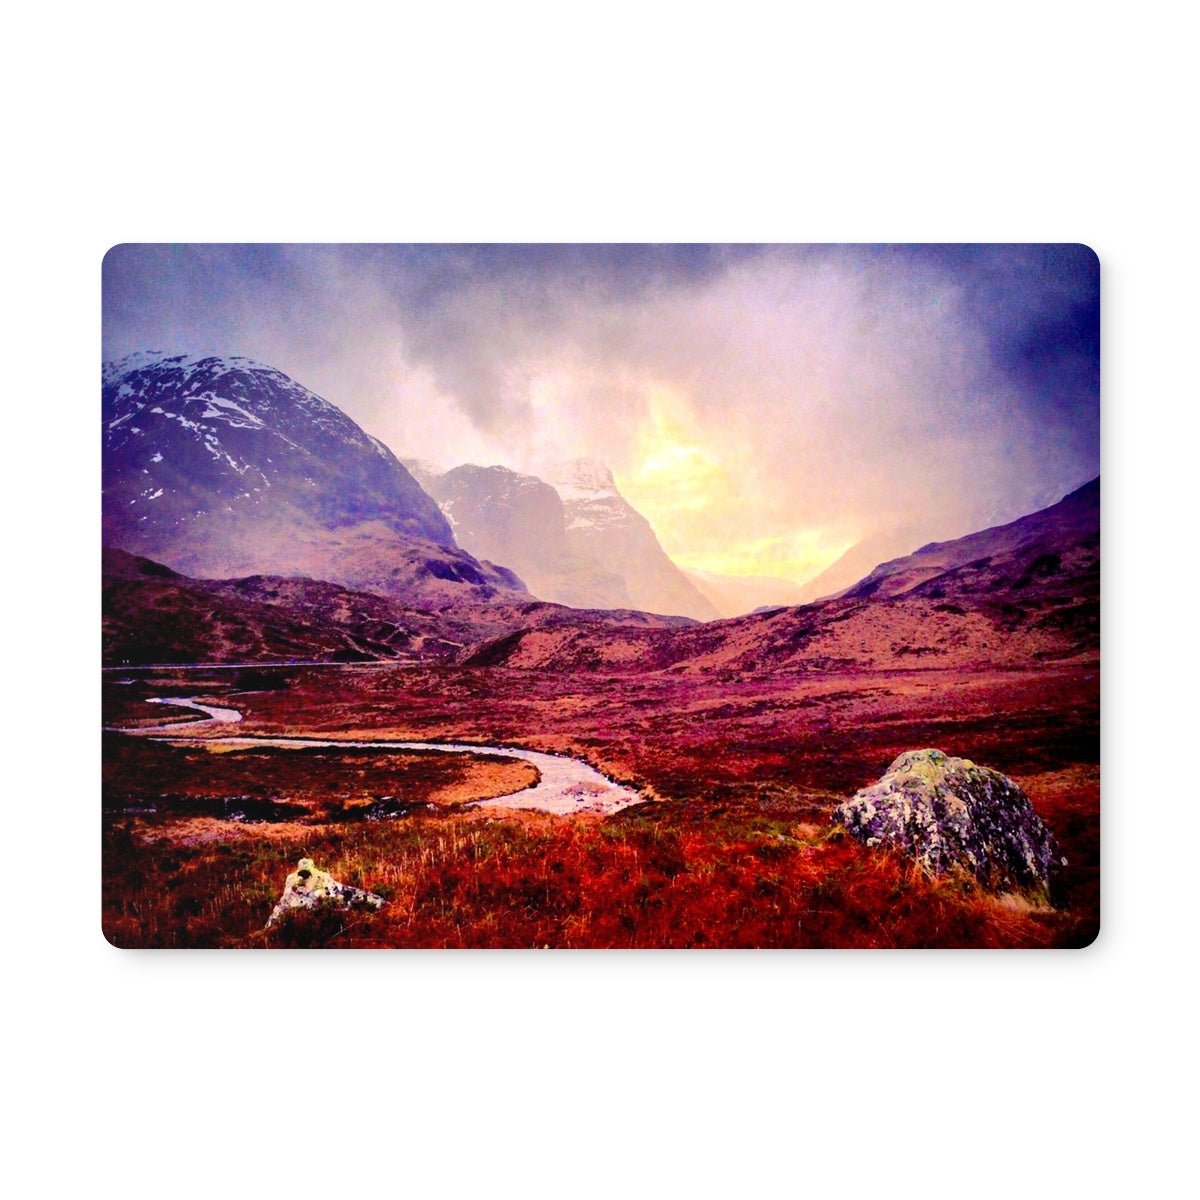 A Brooding Glencoe Art Gifts Placemat-Placemats-Glencoe Art Gallery-Single Placemat-Paintings, Prints, Homeware, Art Gifts From Scotland By Scottish Artist Kevin Hunter